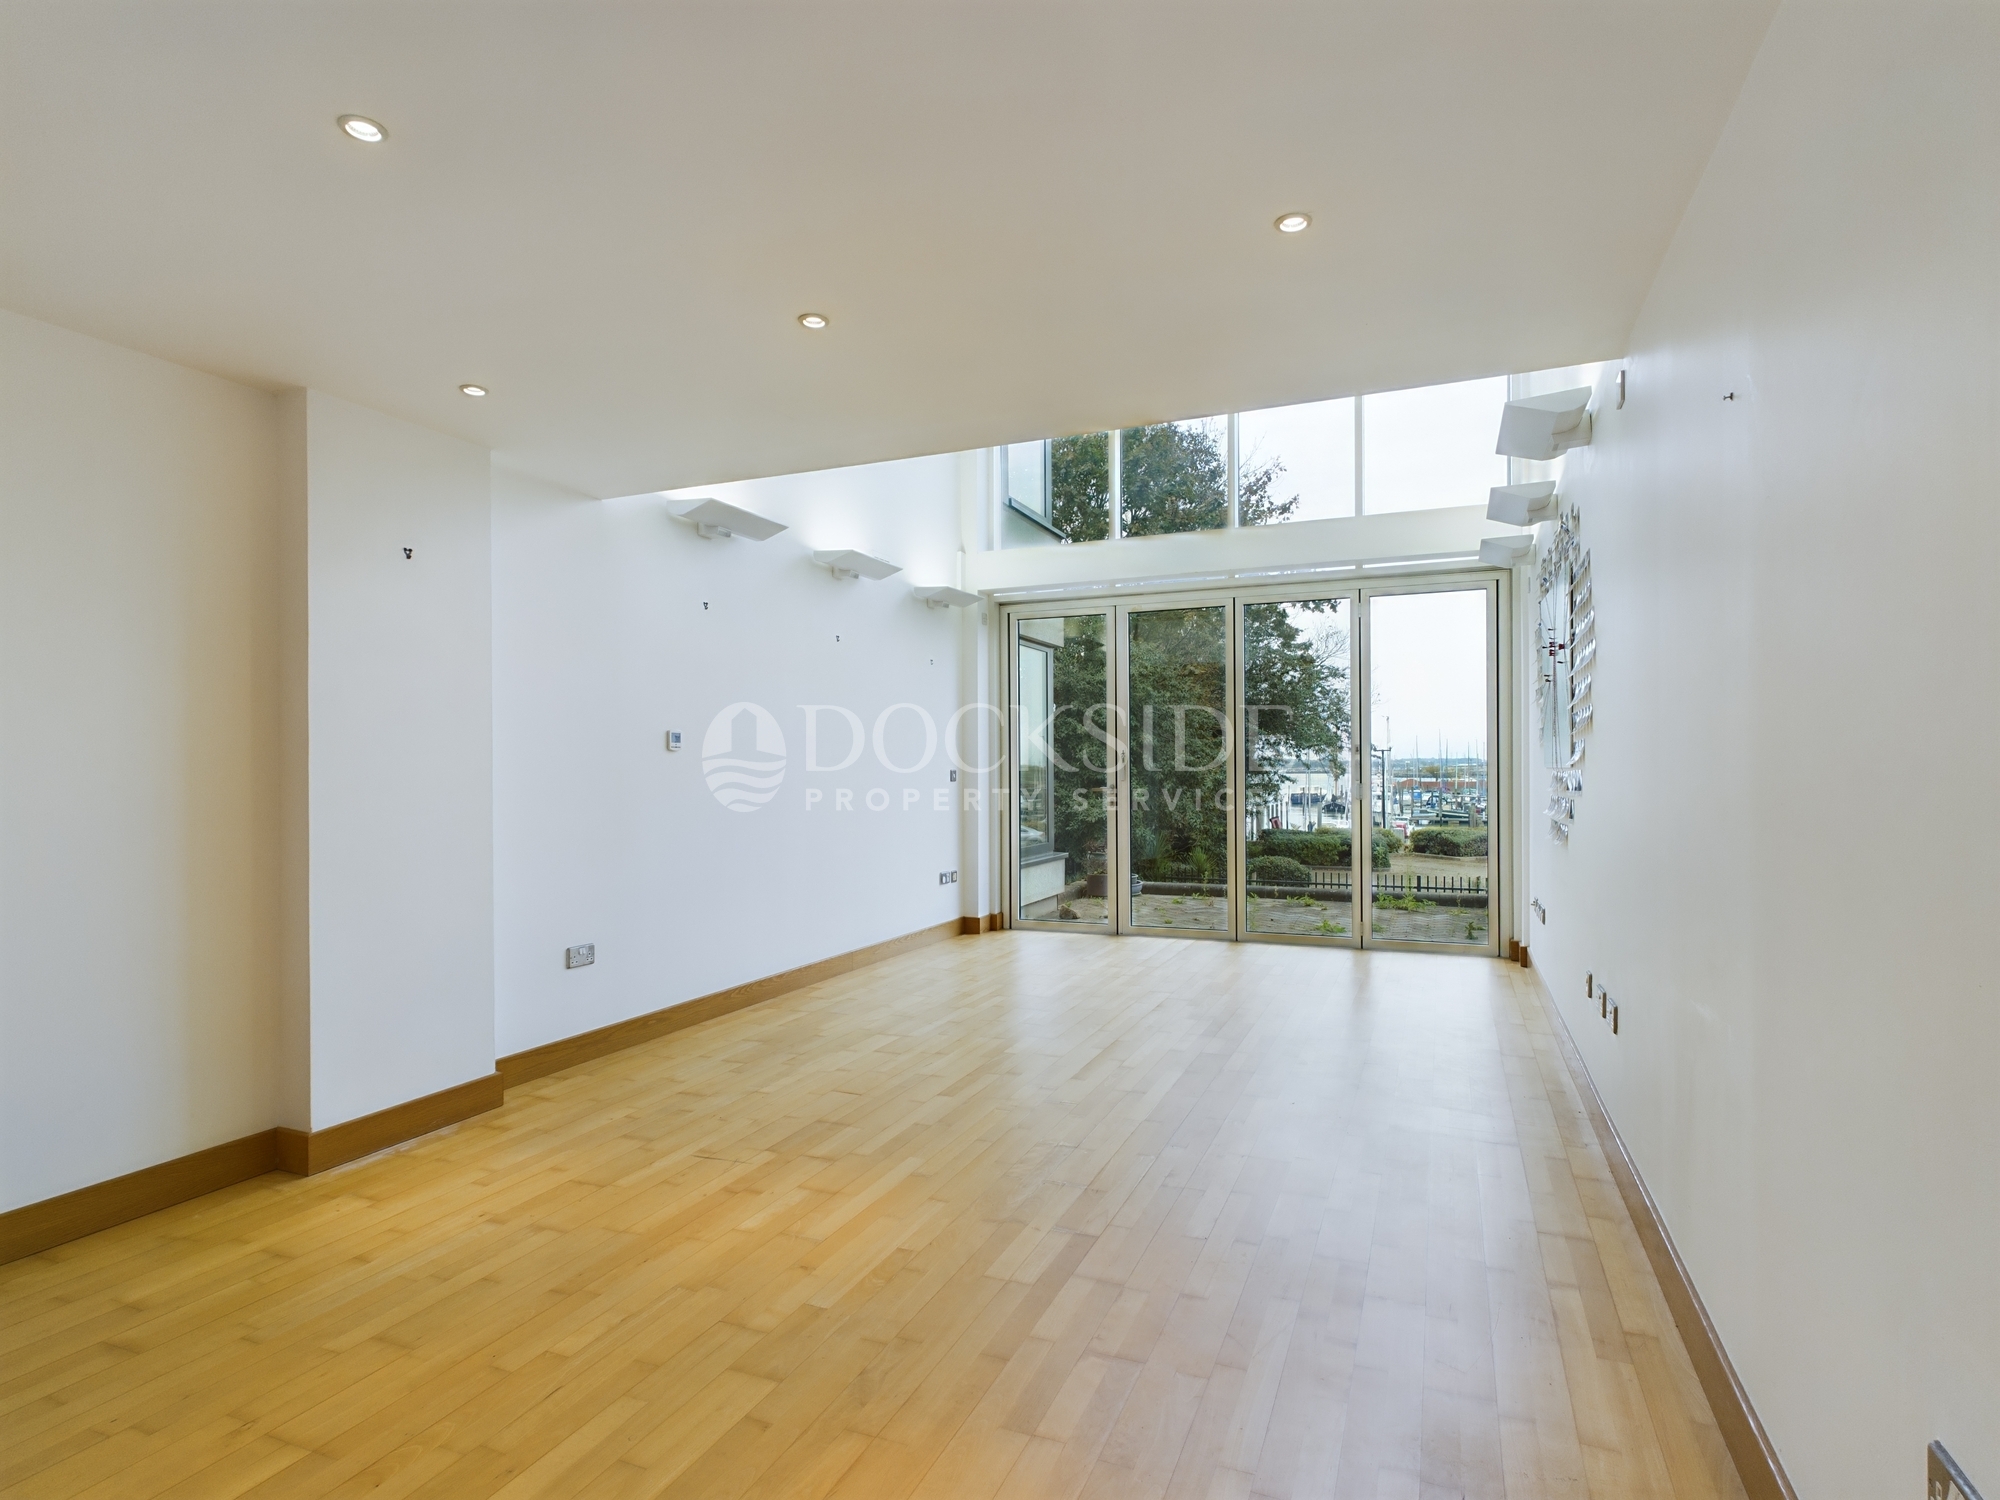 4 bed to rent in Pier Road, Gillingham - Property Image 1